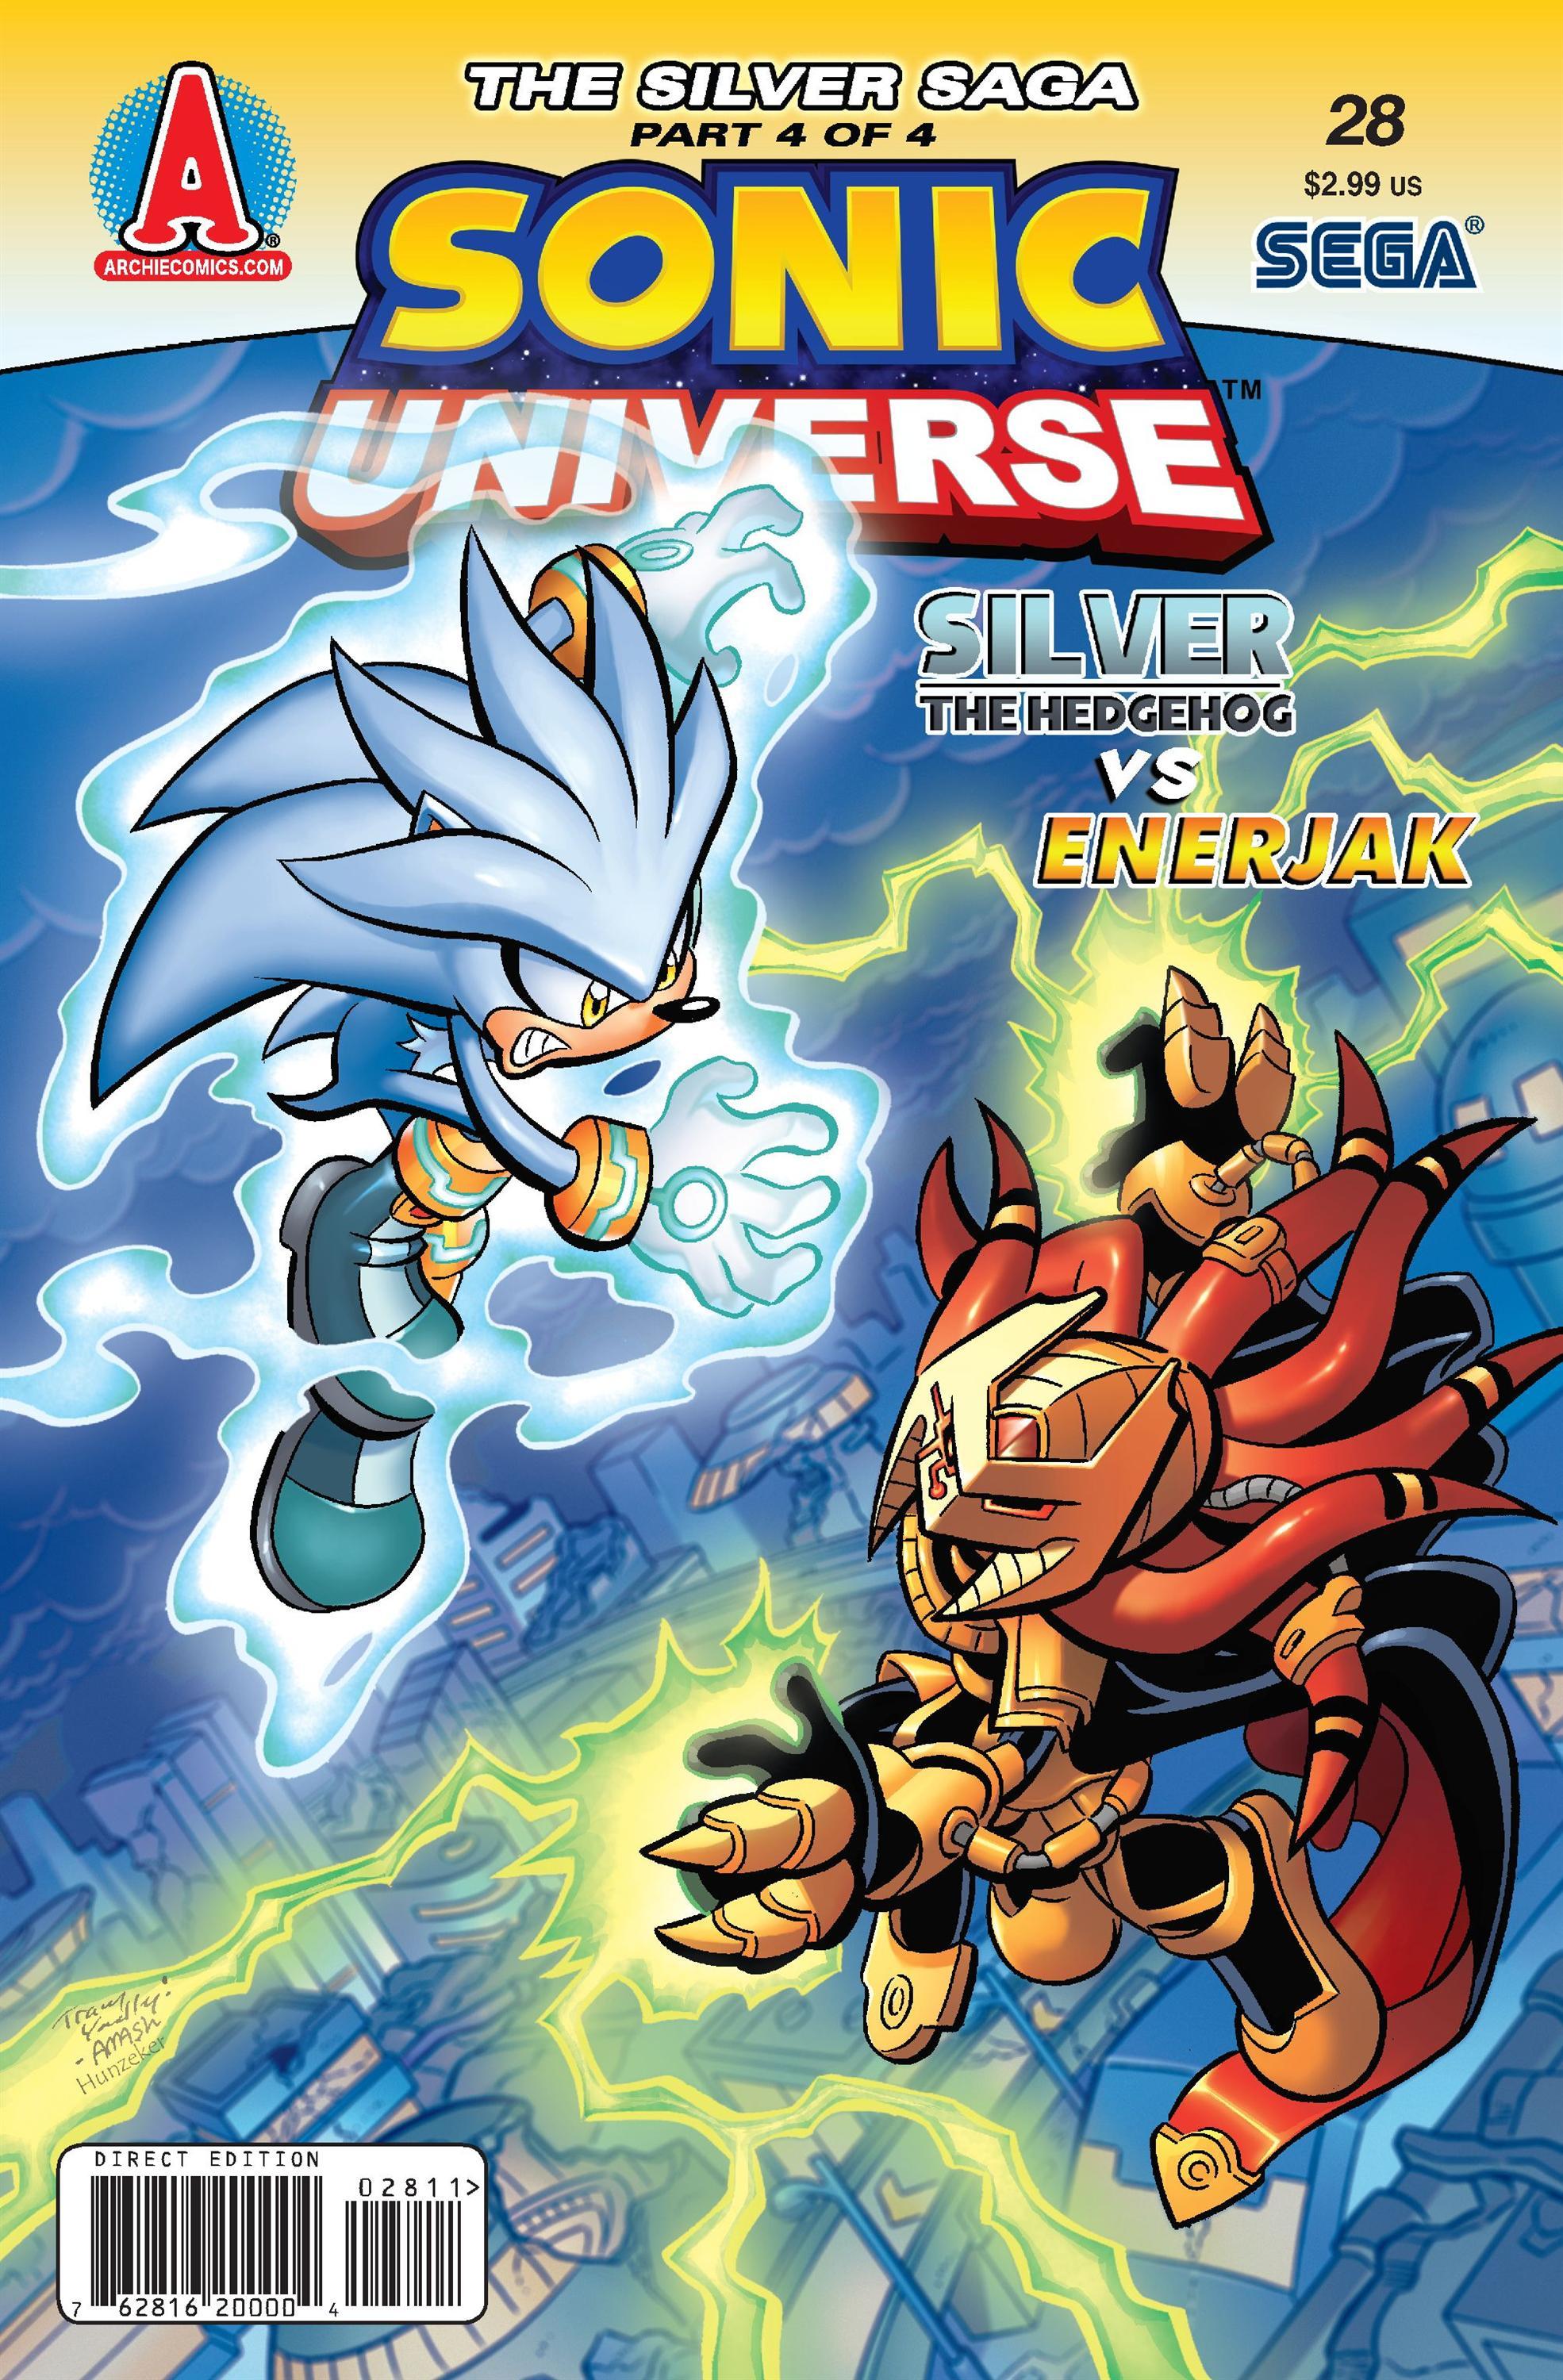 Archie Sonic Universe Issue 28, Sonic Wiki Zone